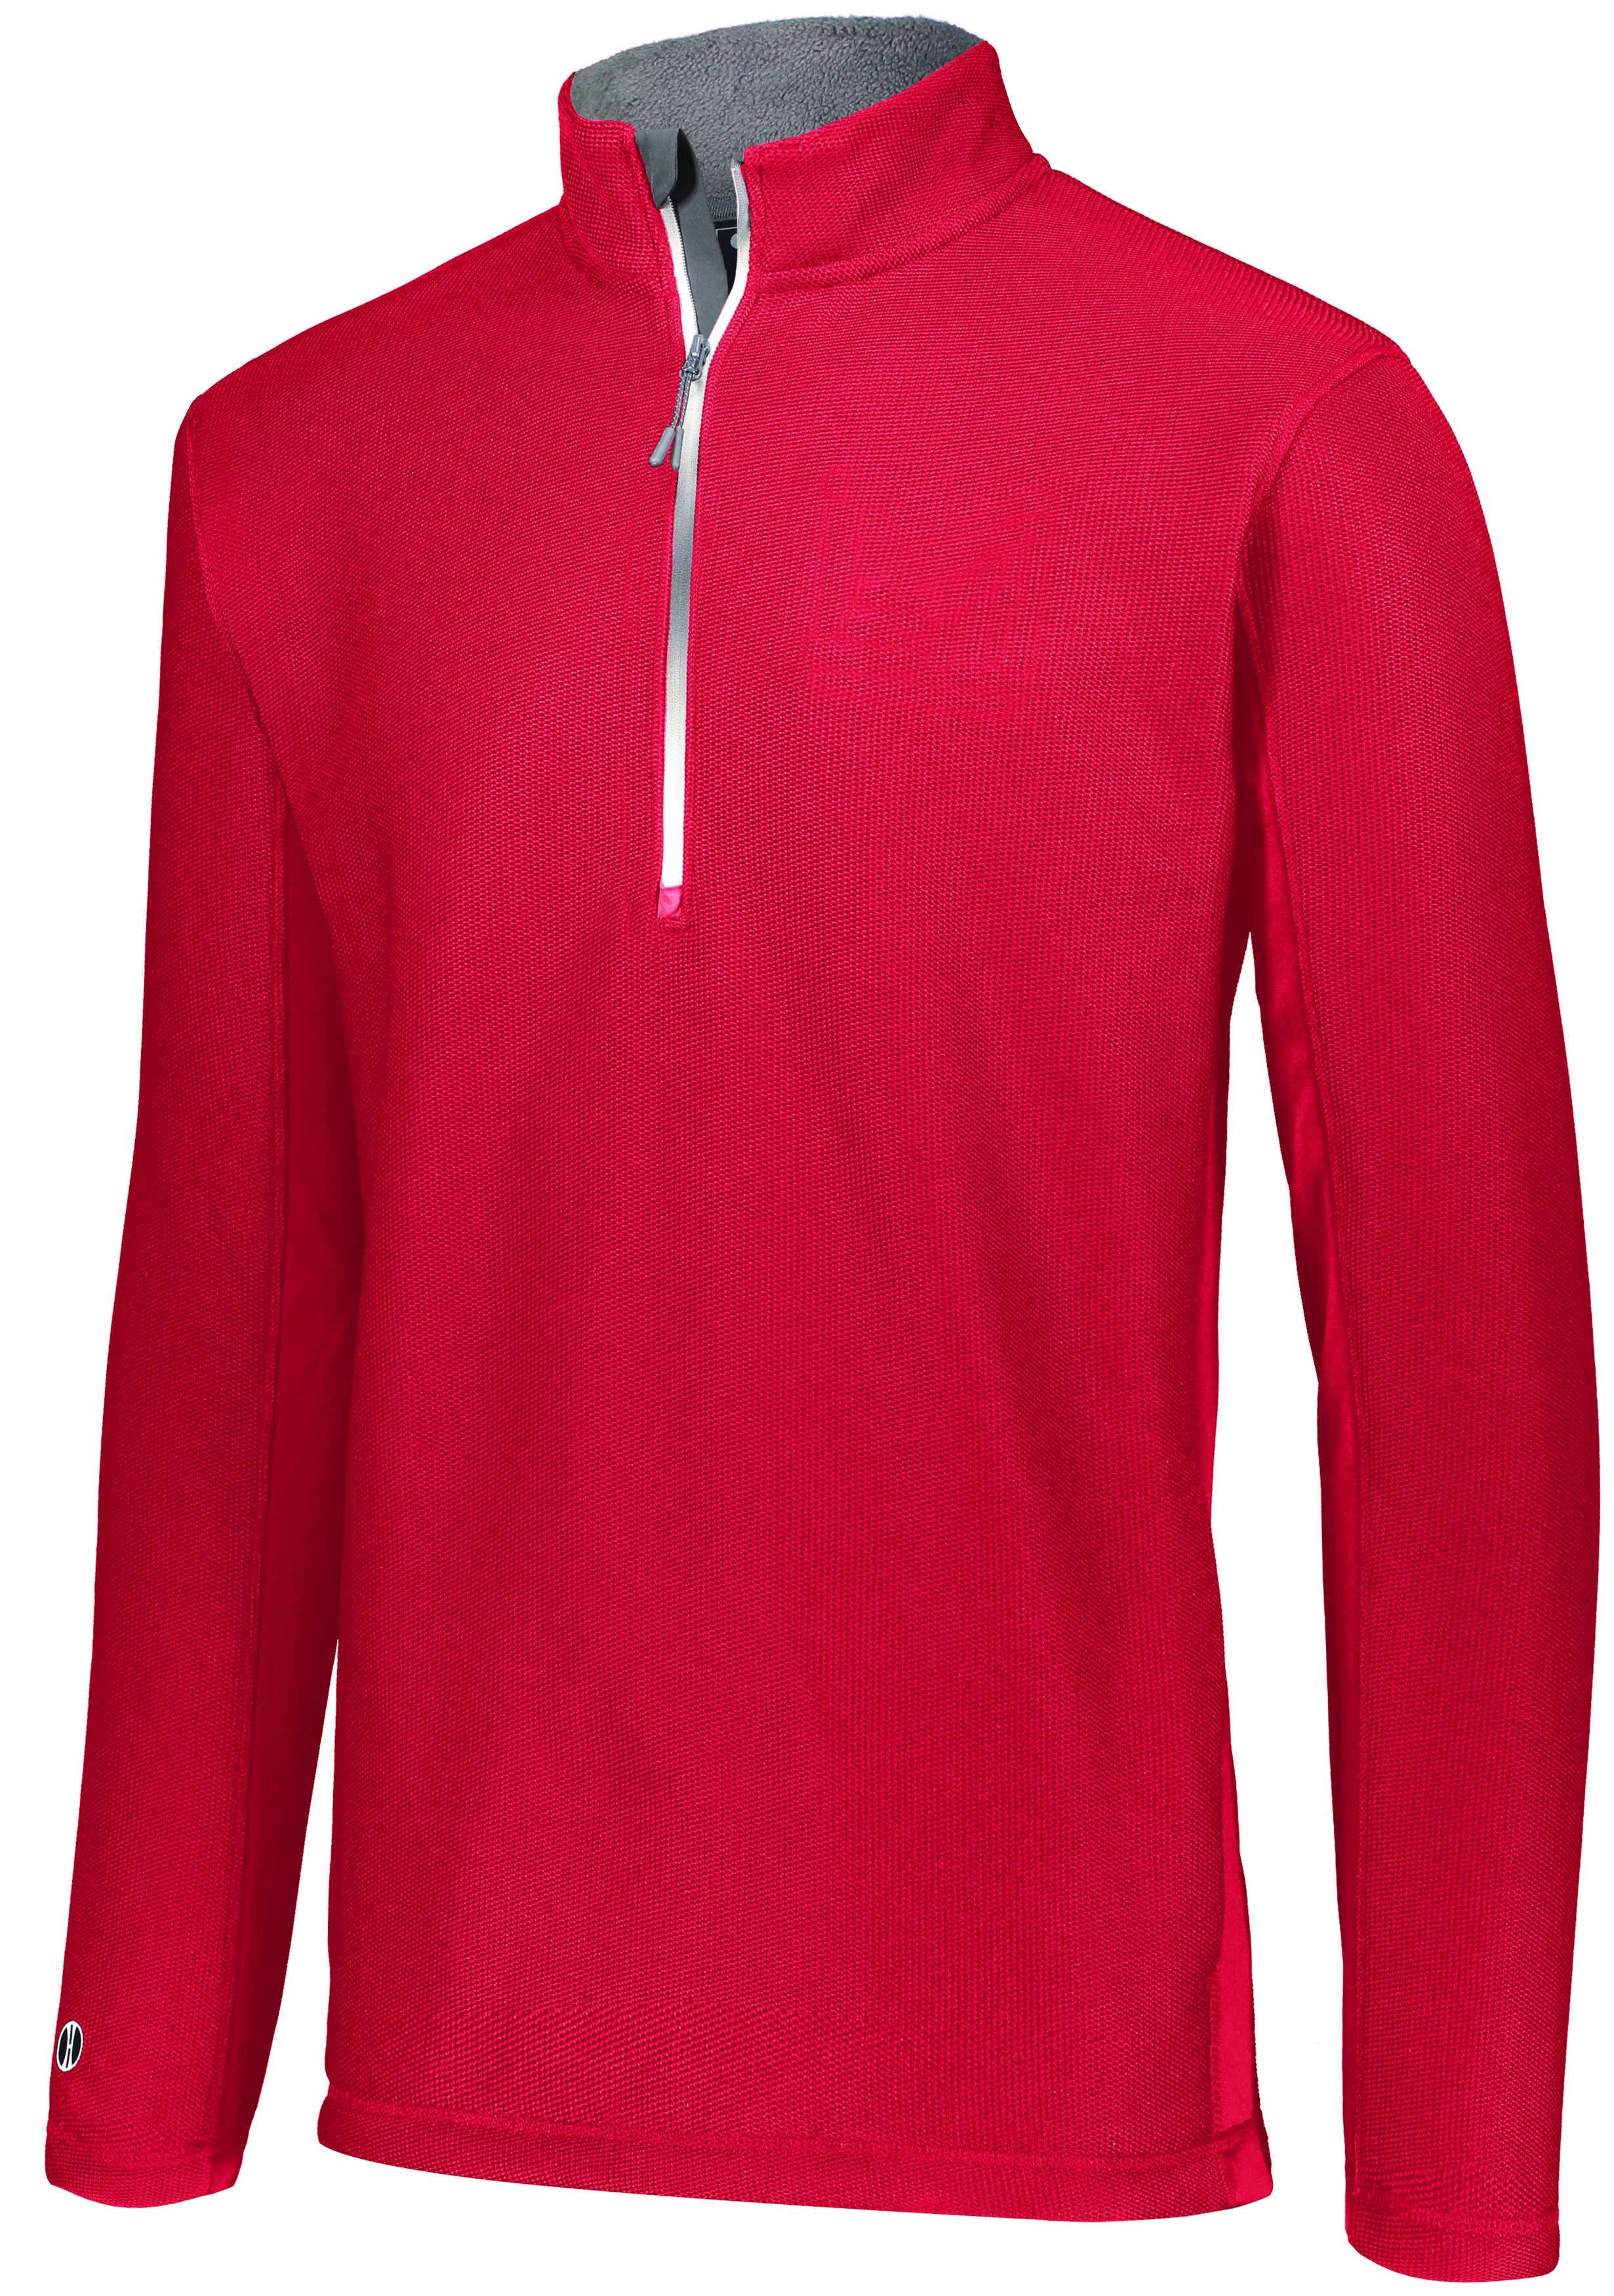 Holloway Invert 1/2 Zip Pullover in Scarlet  -Part of the Adult, Adult-Pullover, Holloway, Outerwear, Invert-Collection product lines at KanaleyCreations.com